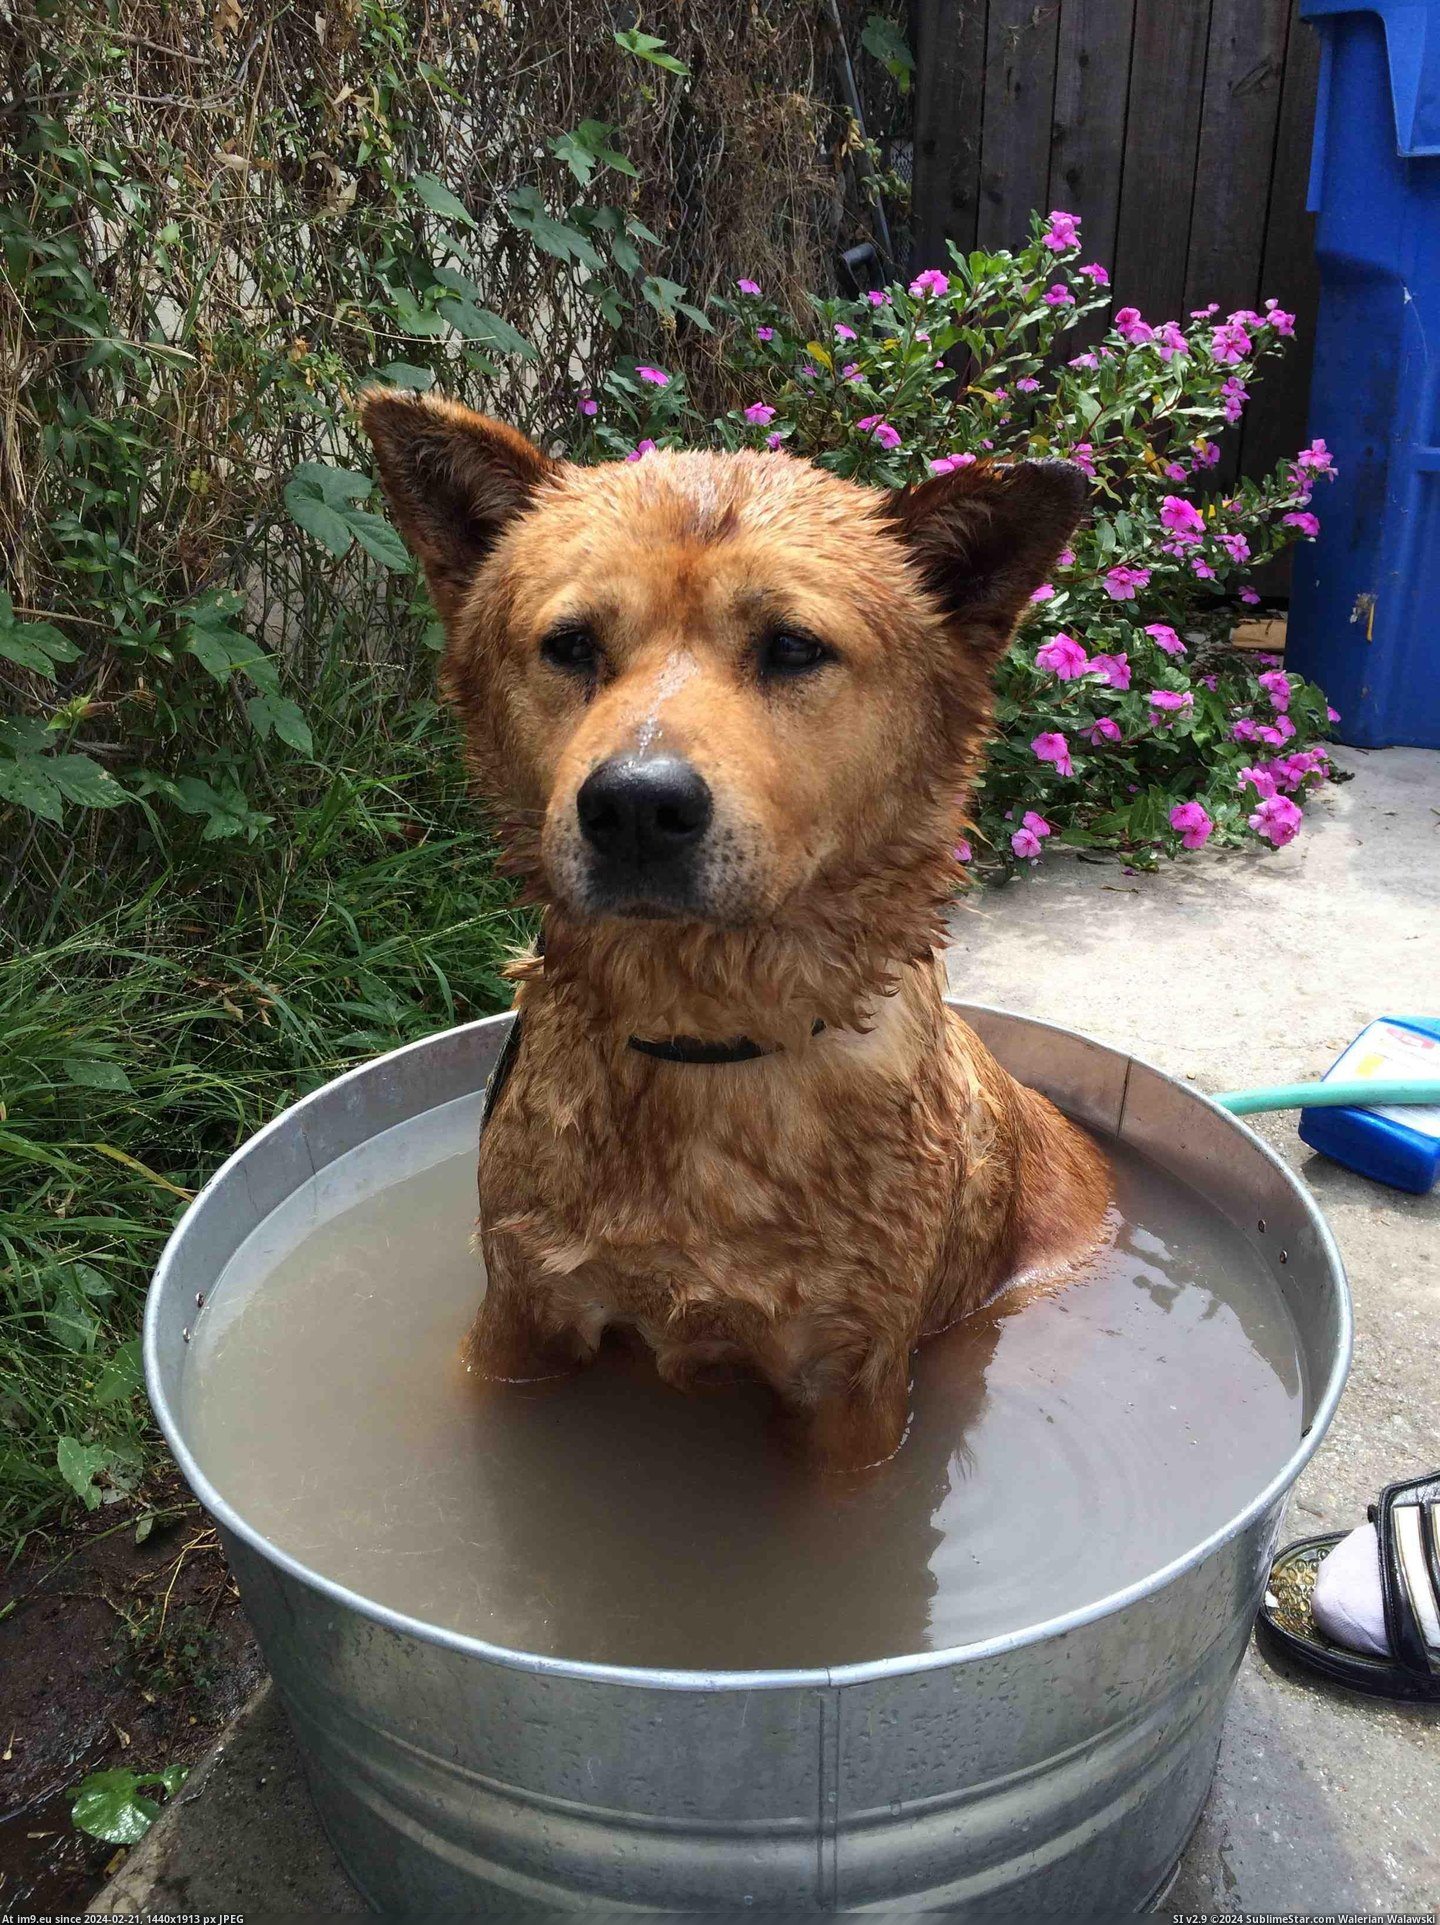 #End #Hates #Quicker #Stays #Washed [Aww] He hates getting washed but he knows if he stays still it'll end quicker Pic. (Изображение из альбом My r/AWW favs))